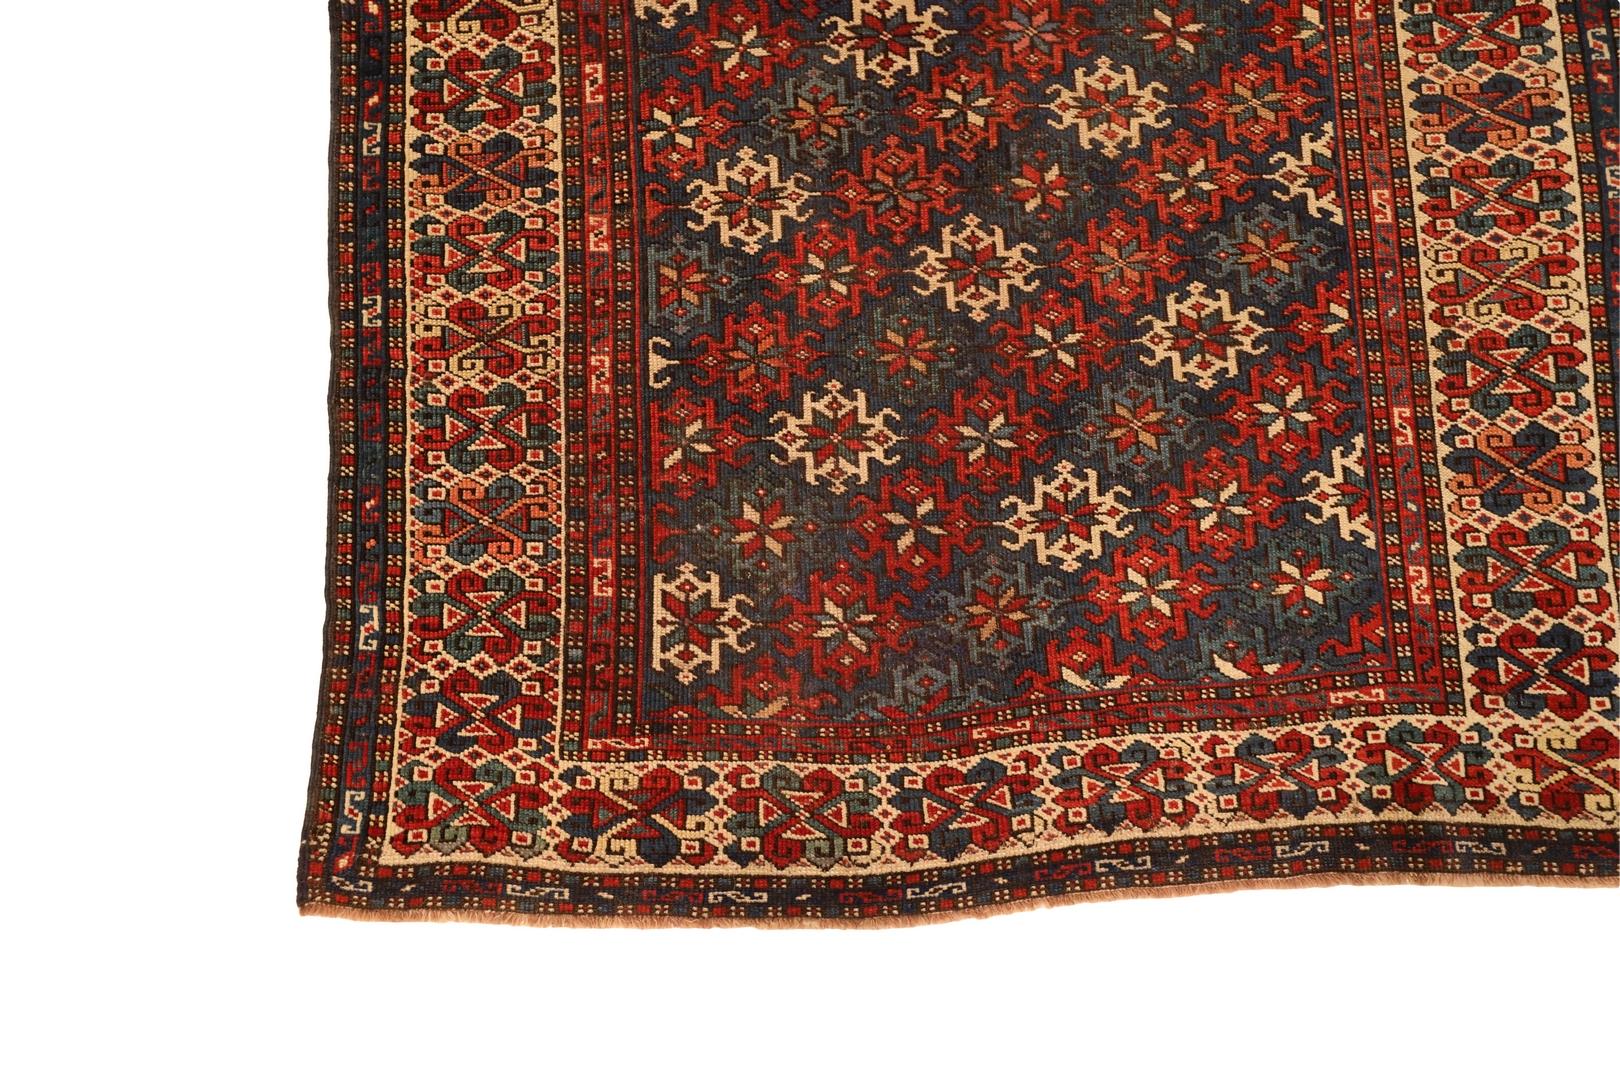 This exquisite Caucasian rug is a true masterpiece of intricate design and craftsmanship. The rug features stunning sun motifs that run diagonally in lines, creating a mesmerizing effect that draws the eye in. The lines are composed of either all